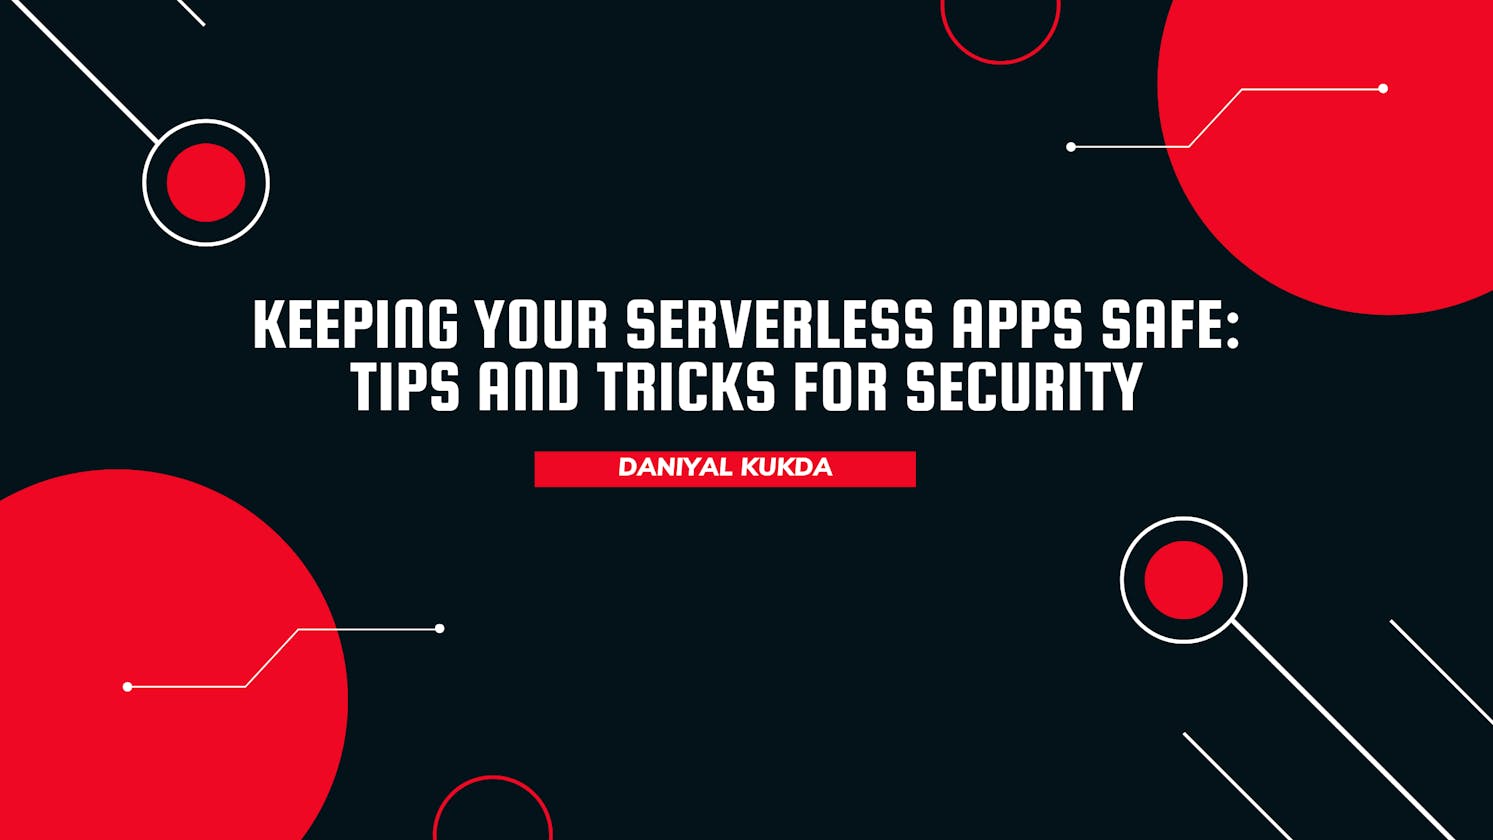 Keeping Your Serverless Apps Safe: Tips and Tricks for Security